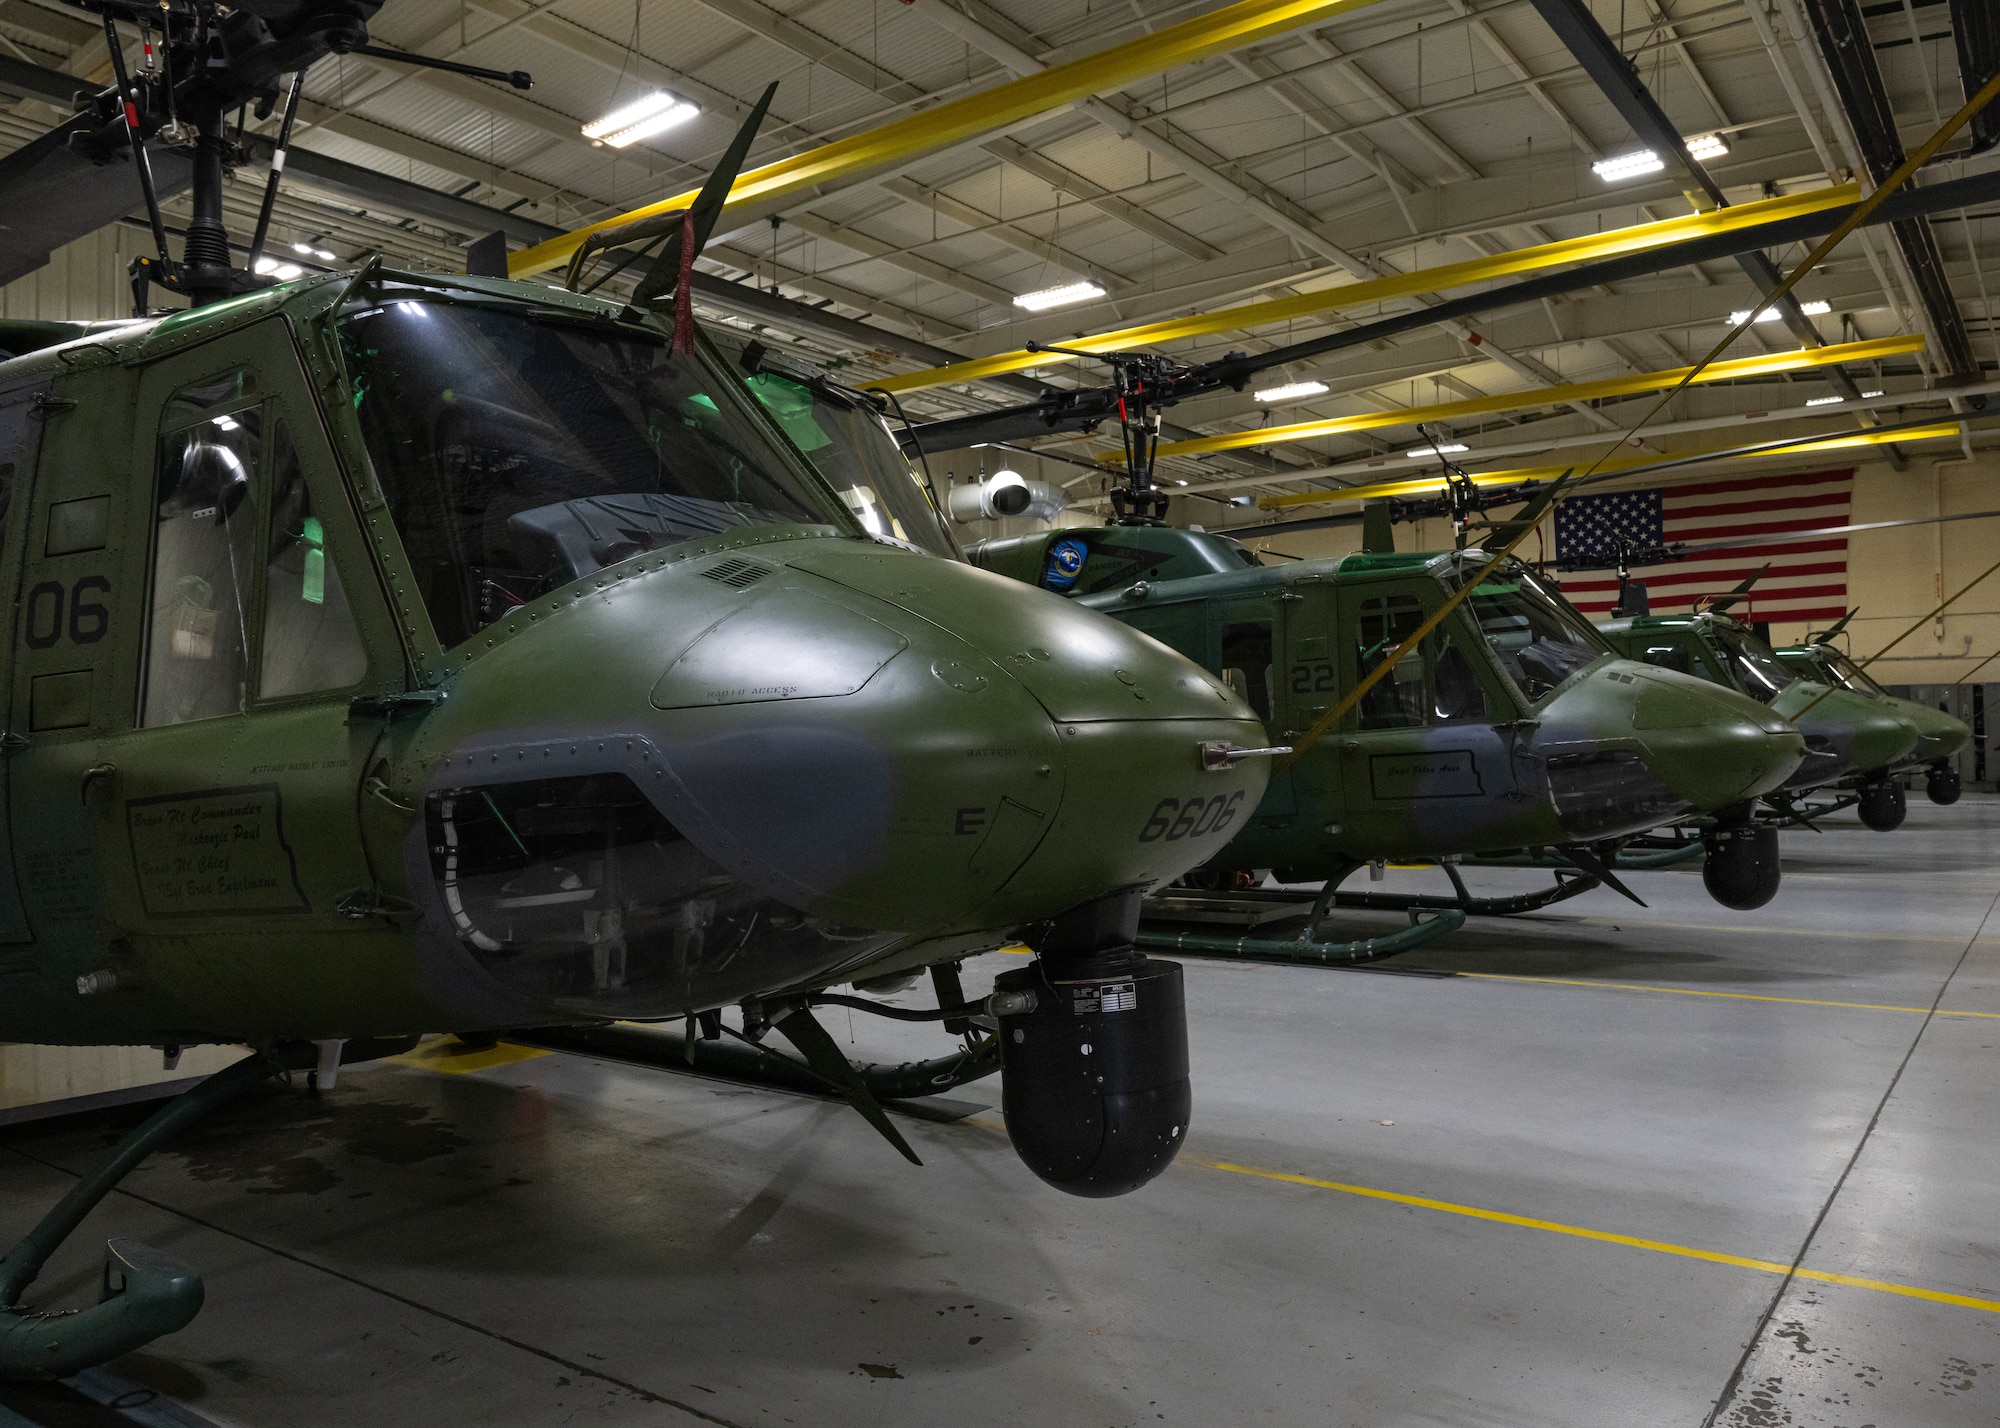 U.S. Air Force UH-1N Iroquois, assigned to the 54th Helicopter Squadron, sit inside a hangar at Minot Air Force Base, North Dakota, Dec. 20, 2023. The UH-1N has been in service with the Air Force since 1970. (U.S. Air Force photo by Airman 1st Class Kyle Wilson)